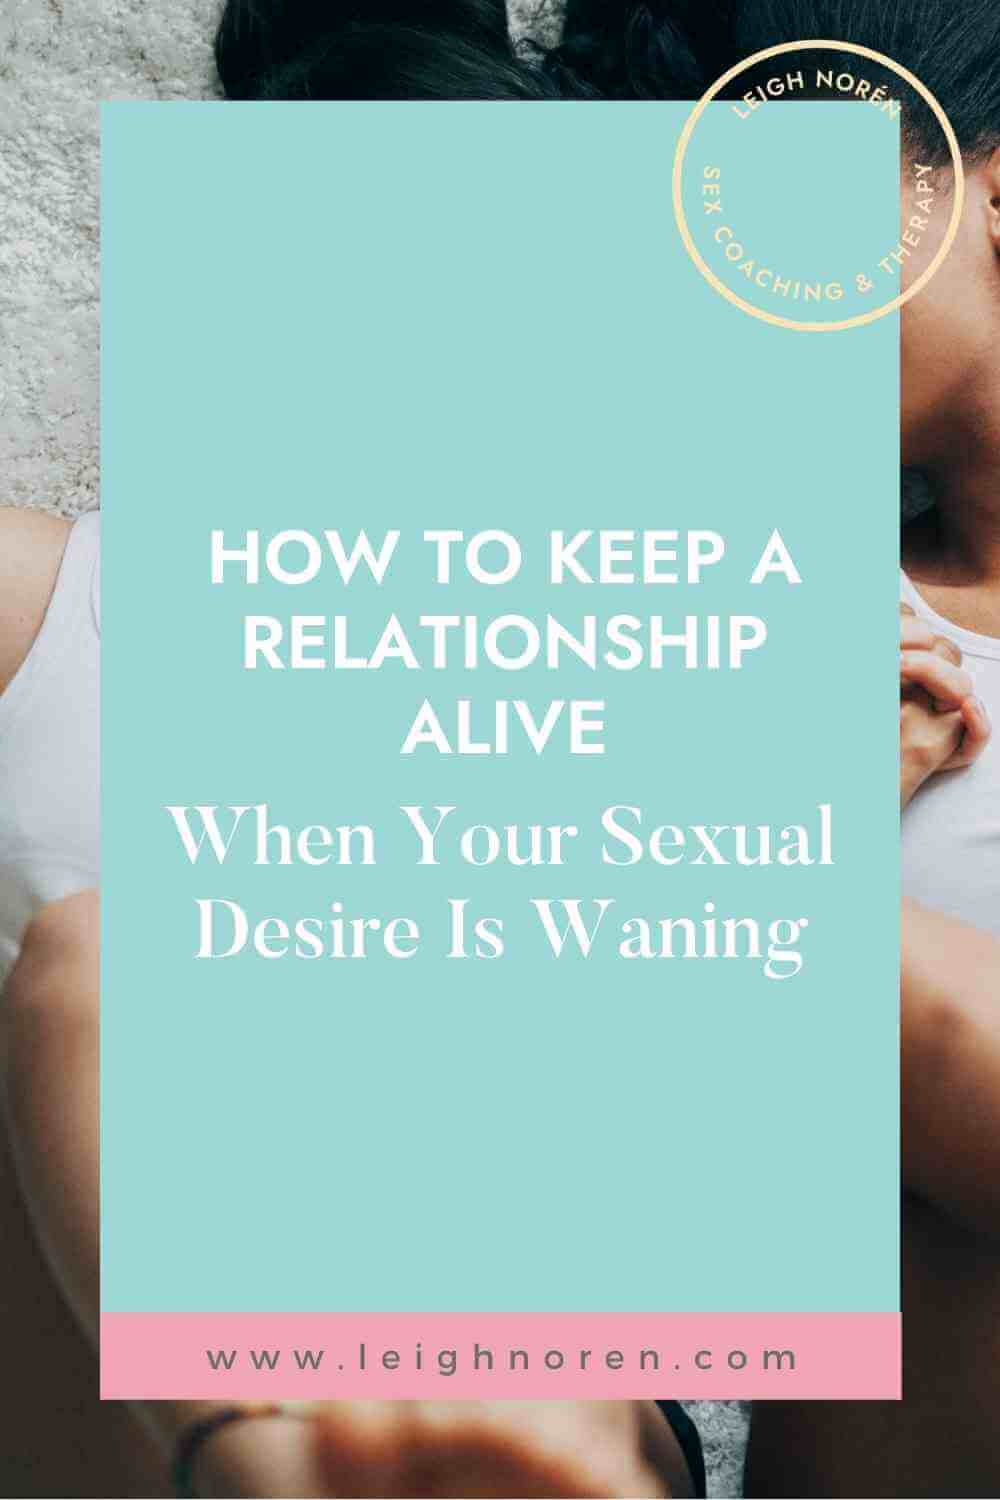 How To Keep A Relationship Alive When Your Sexual Desire Is Waning